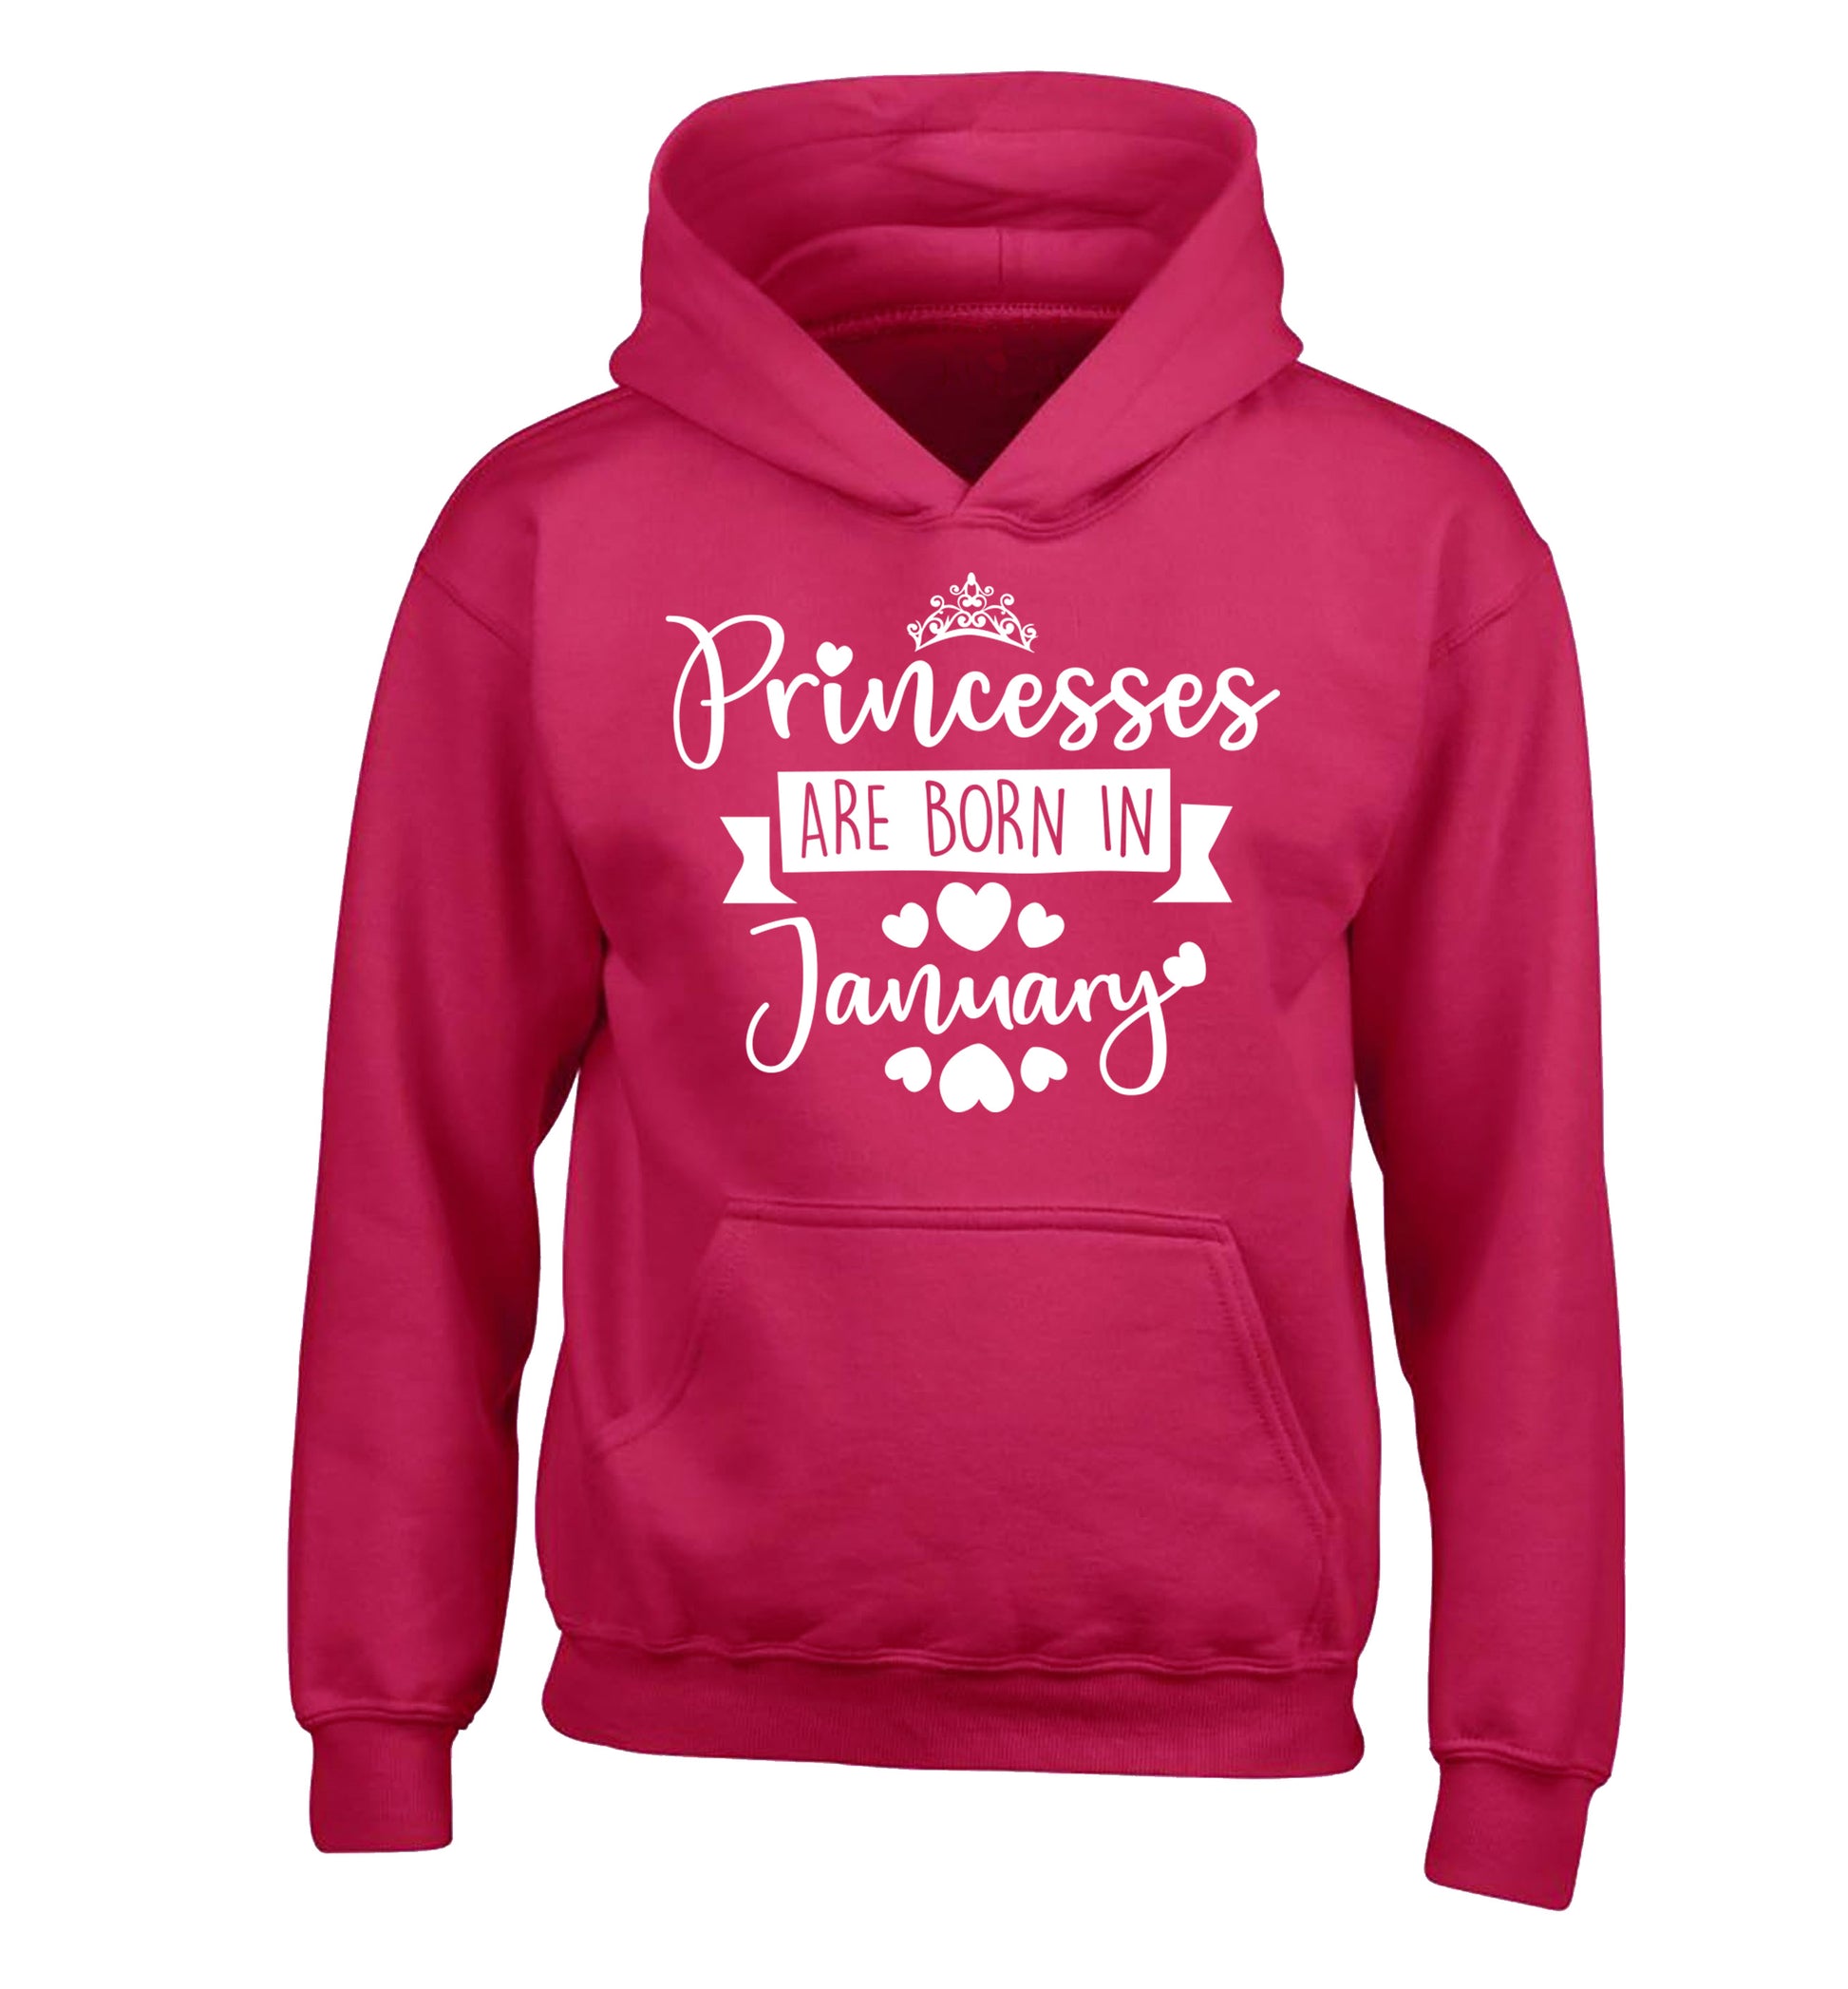 Princesses are born in November children's pink hoodie 12-13 Years